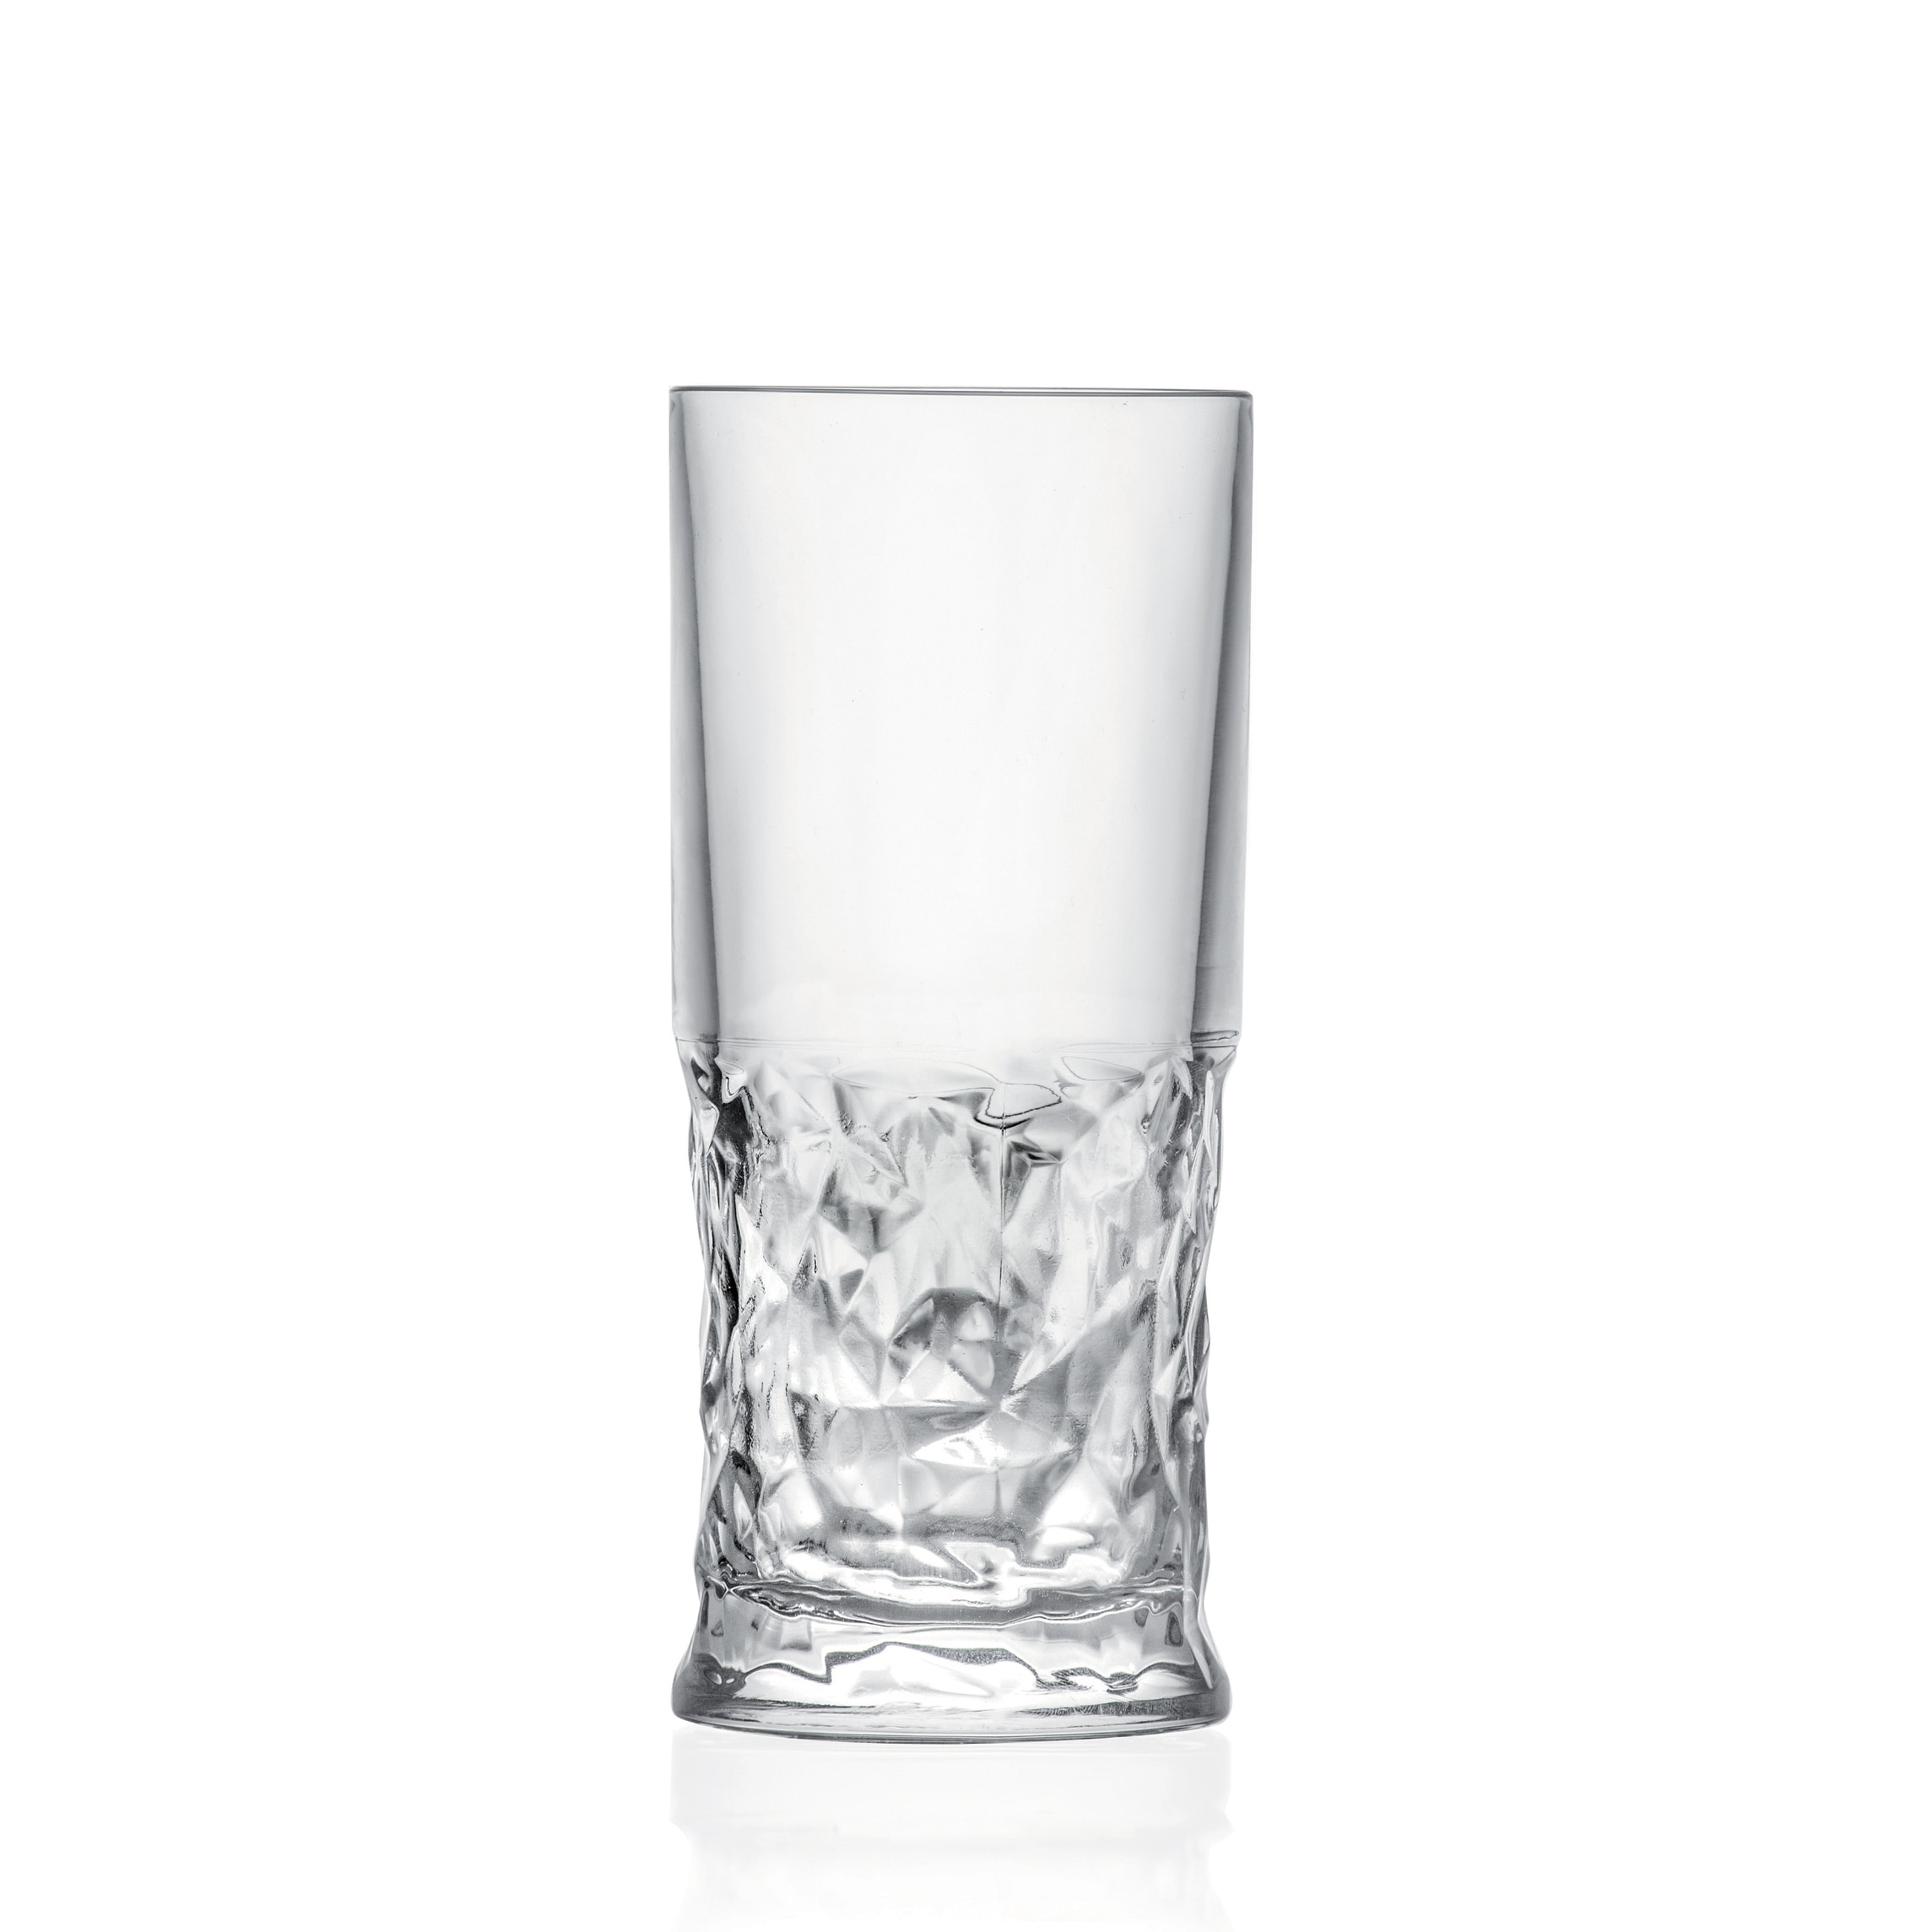 Highball - Glass - Set of 6 - Hiball Glasses - 12 oz. - by Majestic Gifts Inc. - Made in Europe